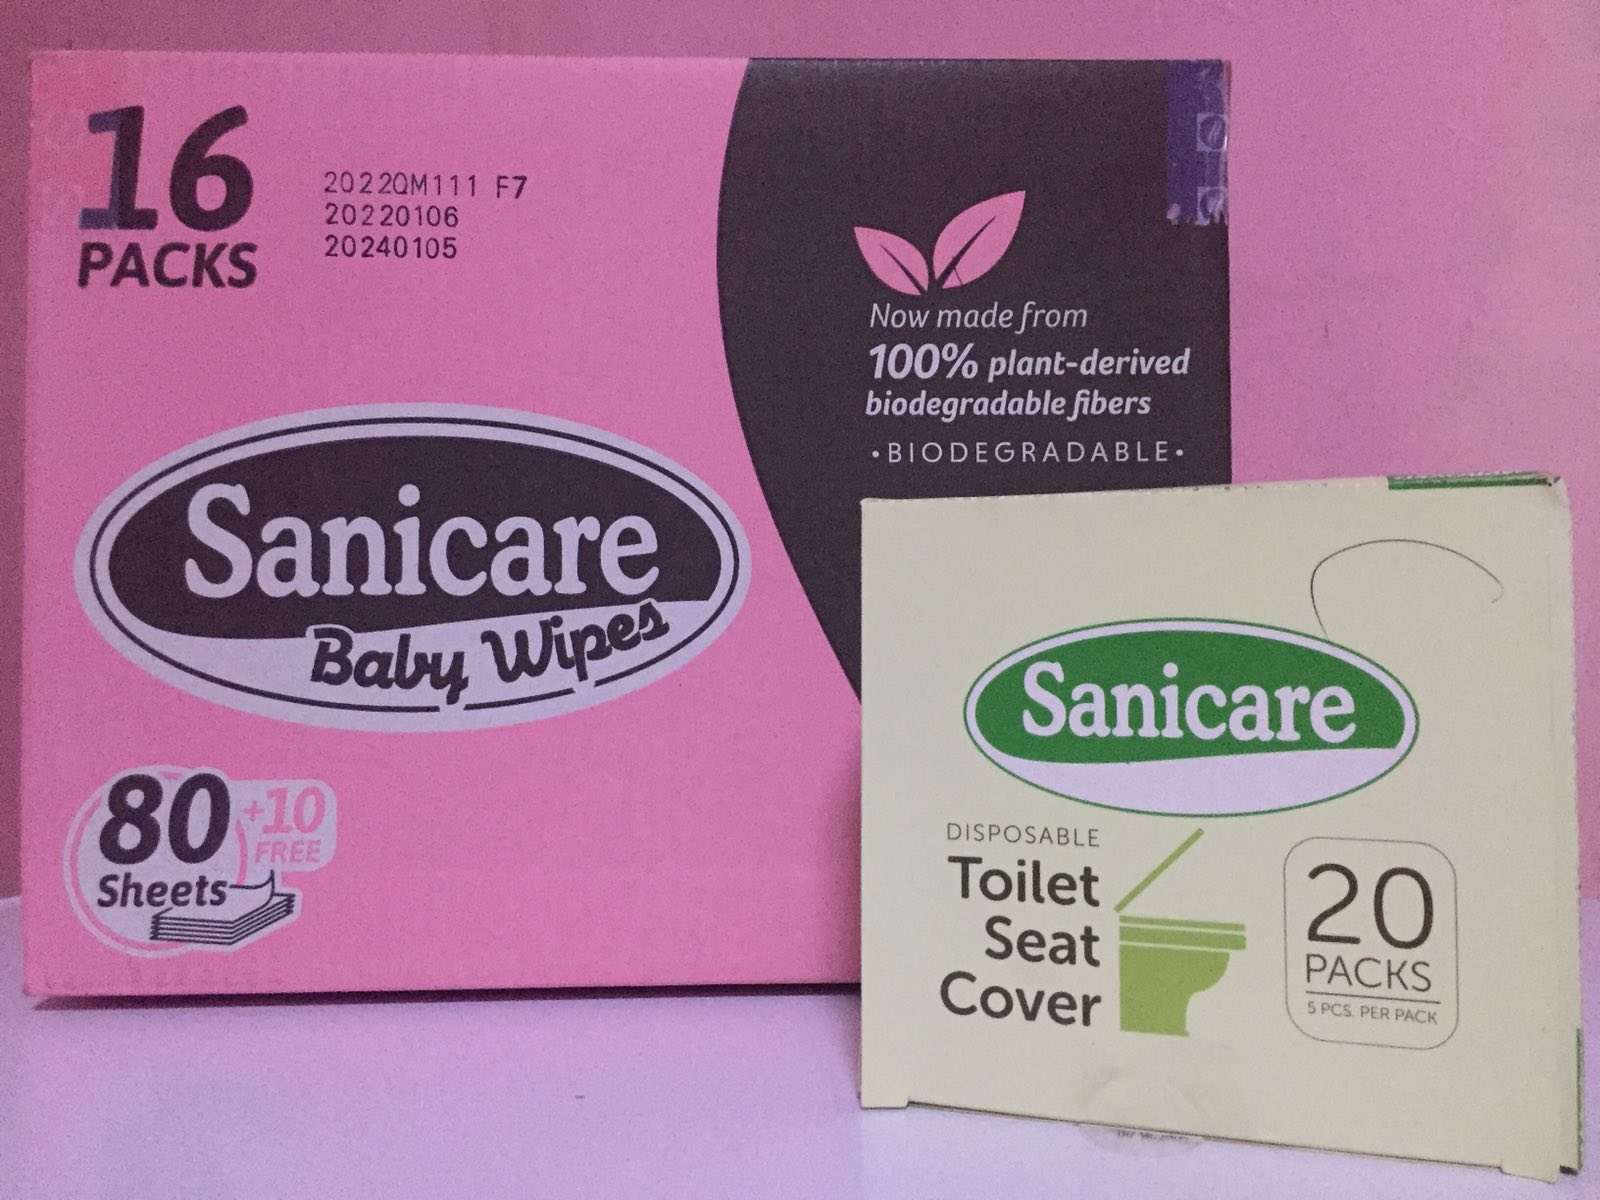 Sanicare Baby Wipes And Sanicare Disposable Toilet Seat Cover